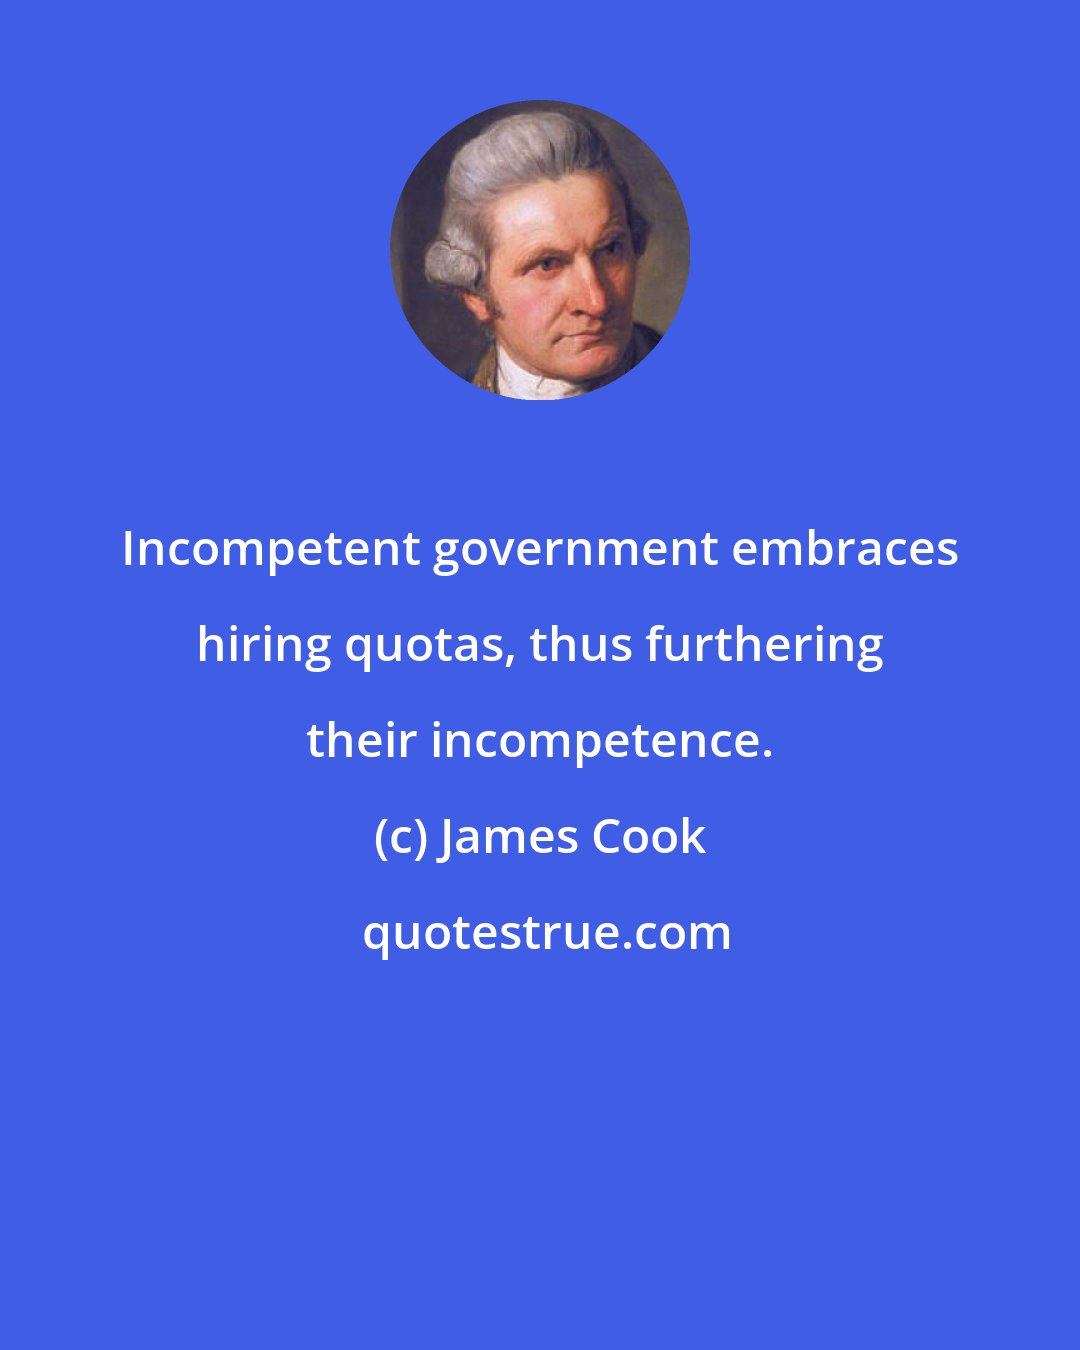 James Cook: Incompetent government embraces hiring quotas, thus furthering their incompetence.